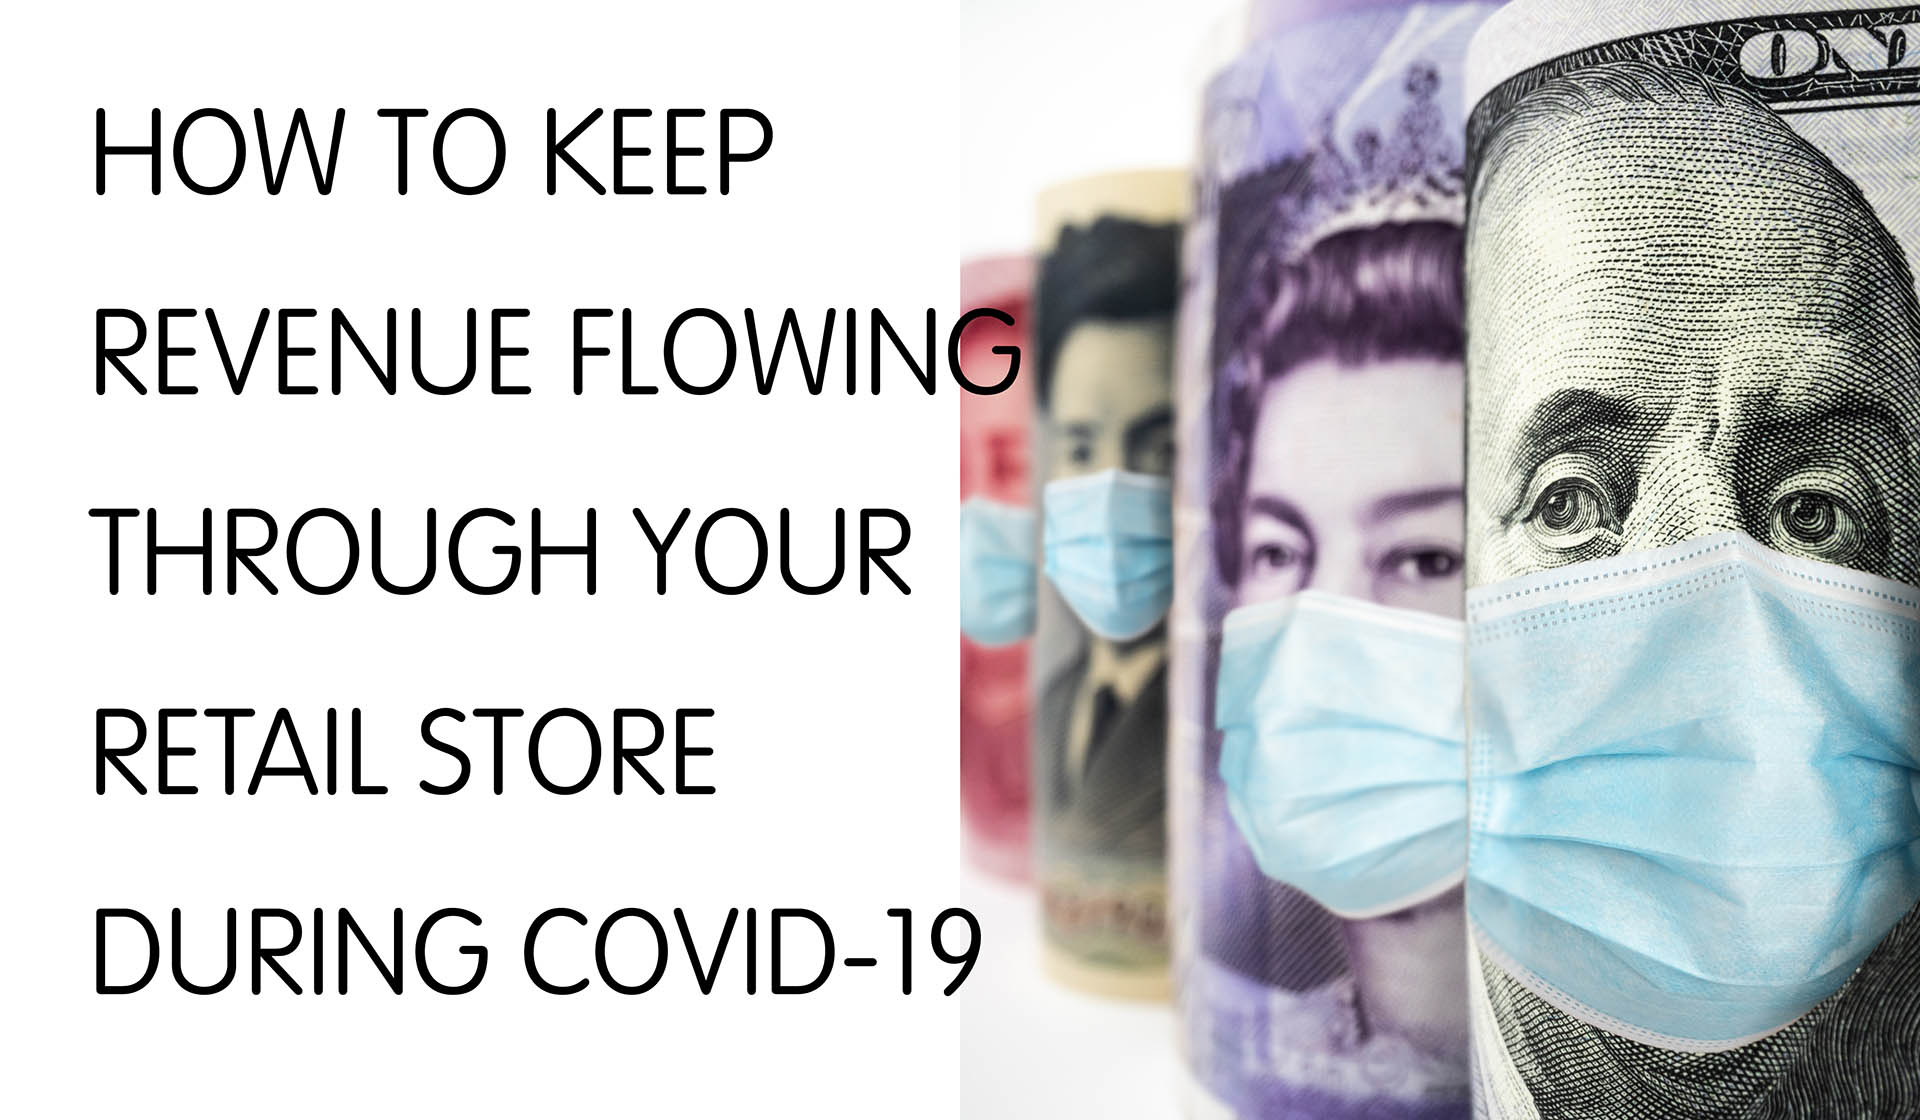 How to Keep Revenue Flowing Through Your Retail Store During COVID-19